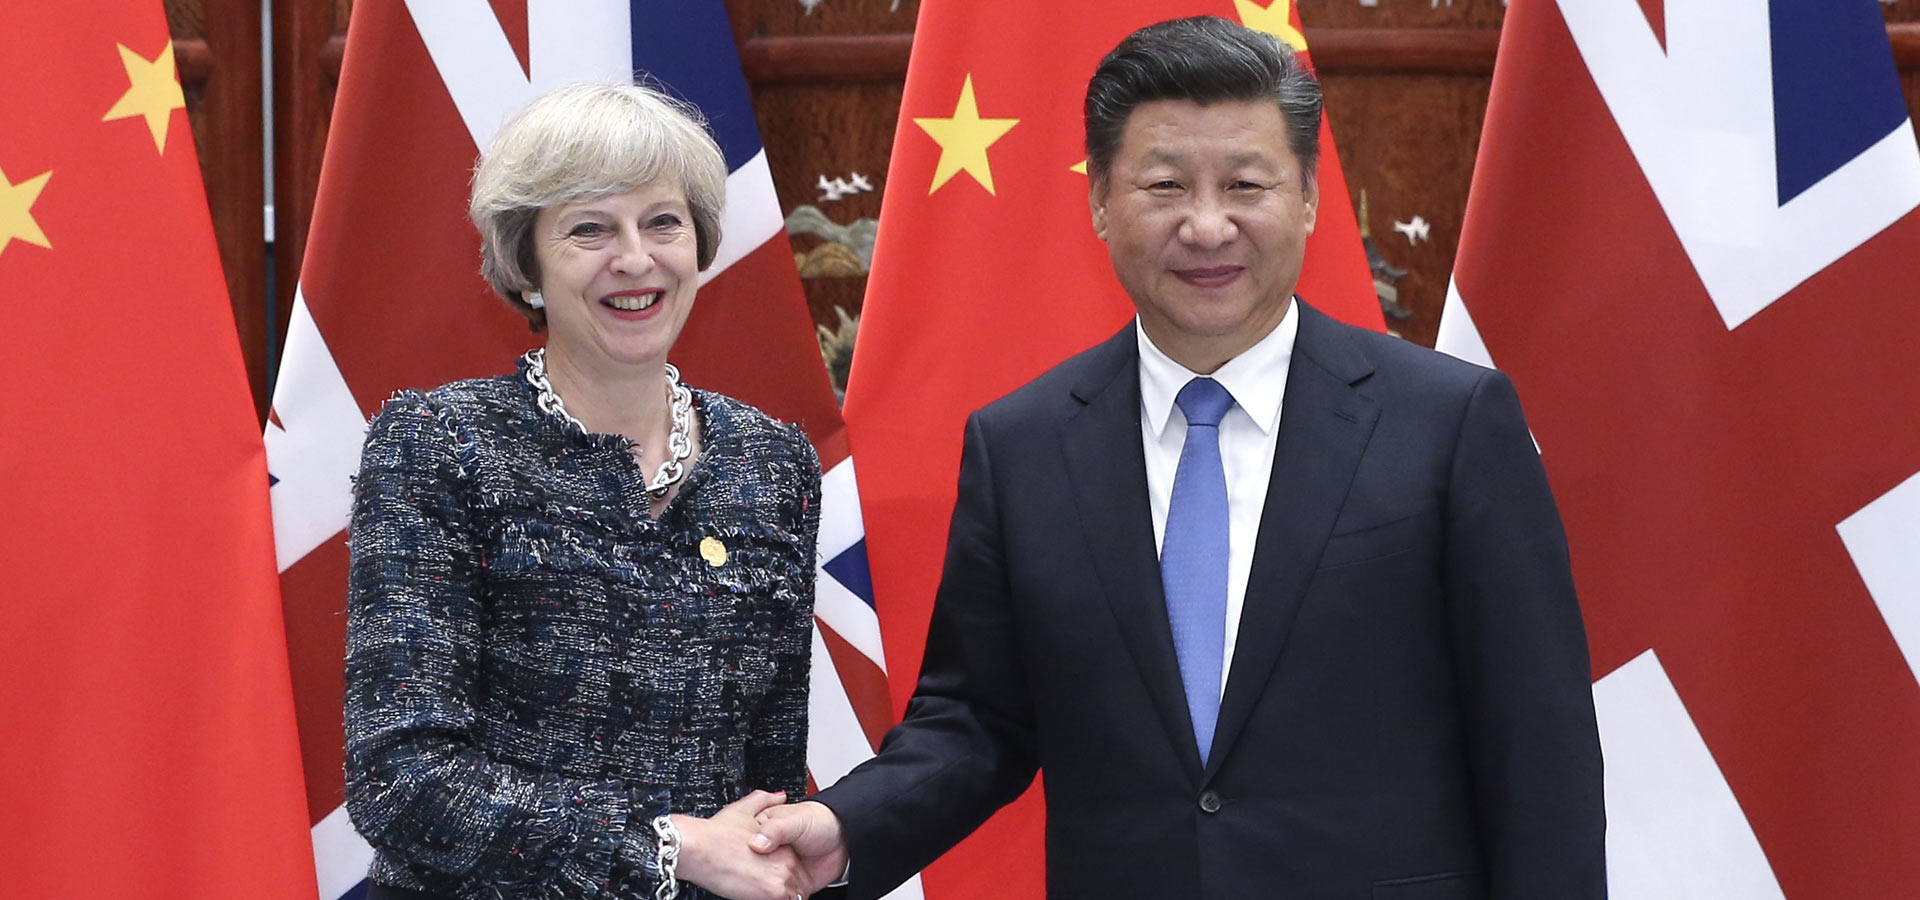 Xi urges China, Britain to deepen mutual trust, cooperation